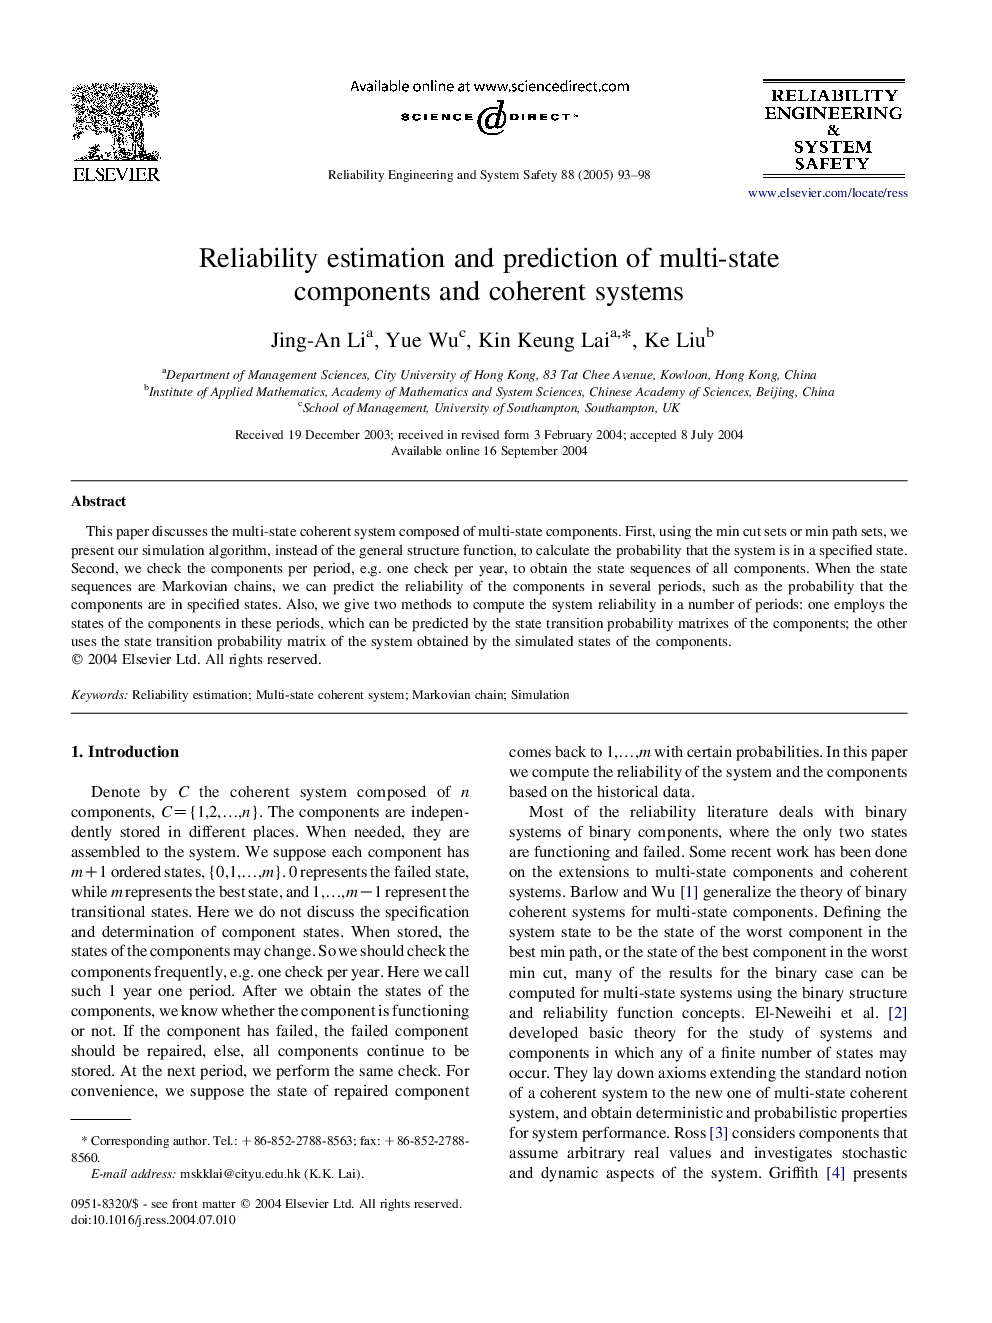 Reliability estimation and prediction of multi-state components and coherent systems